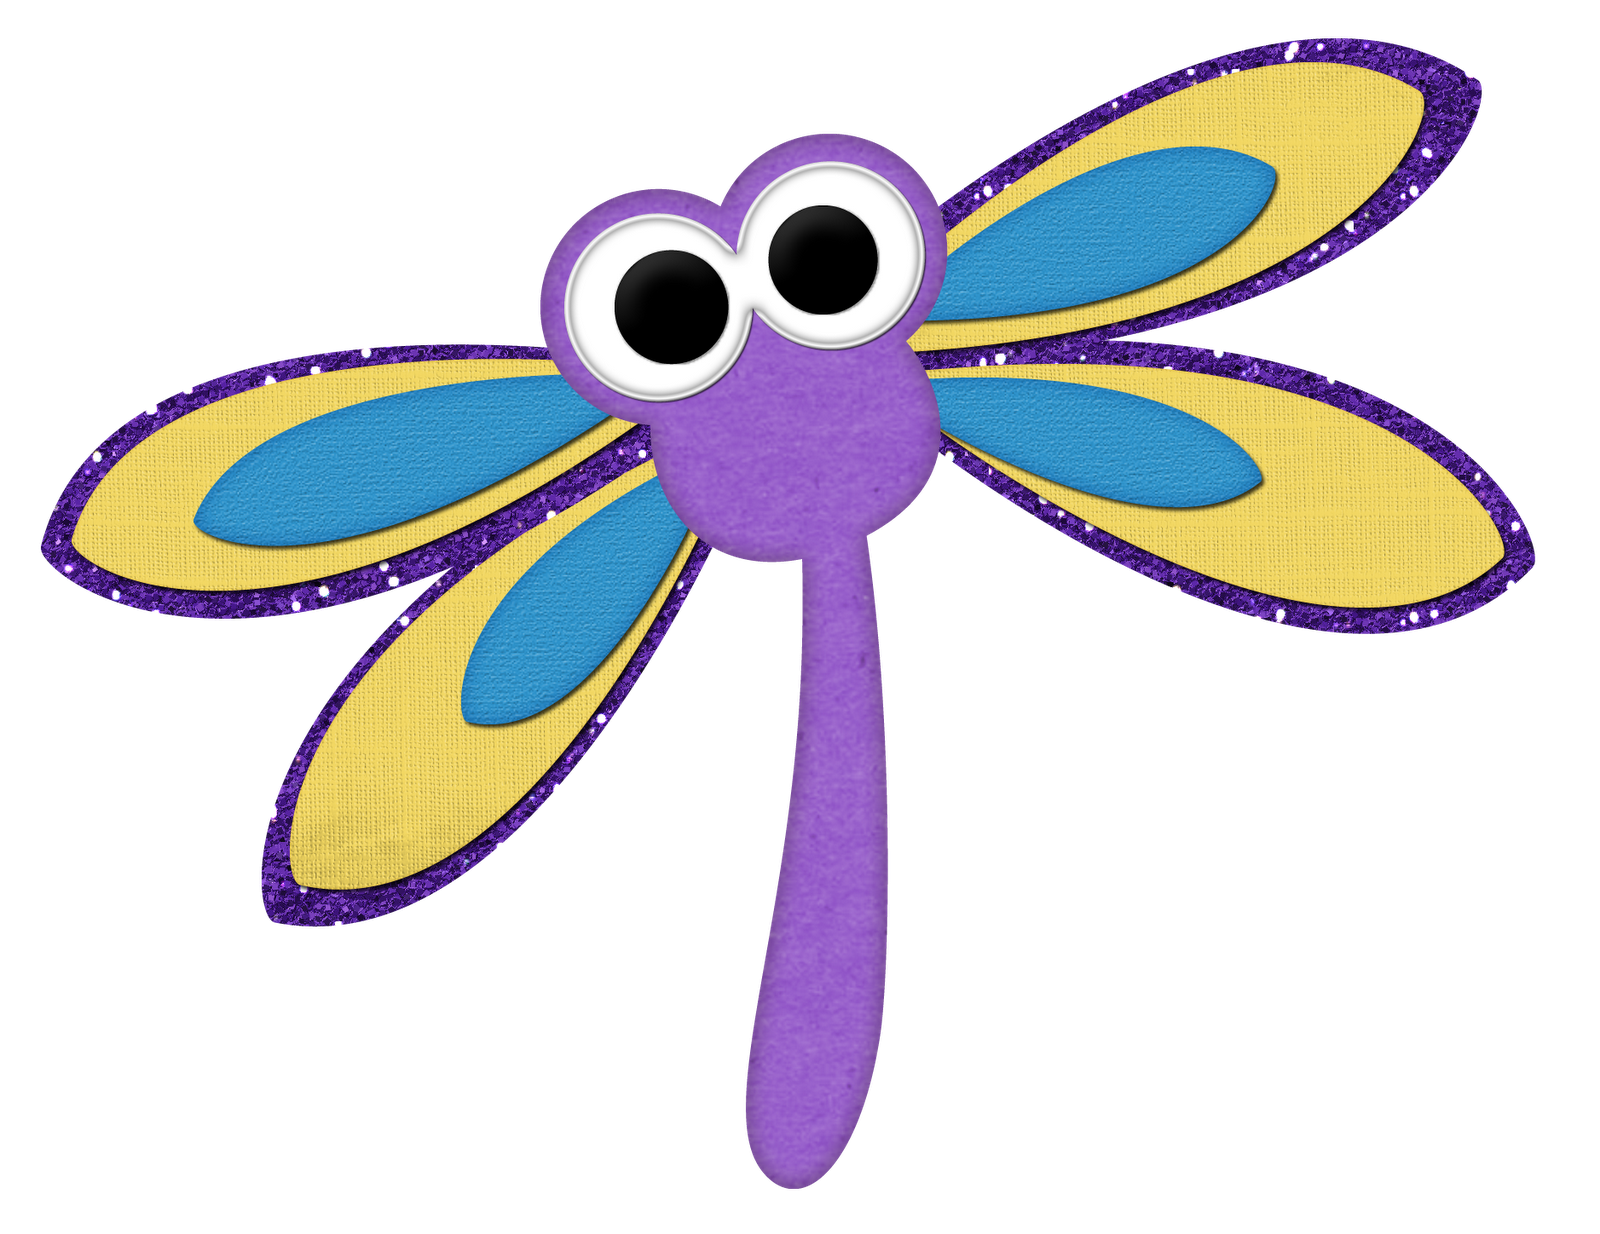 Dragonfly clipart real. Clip art stock images